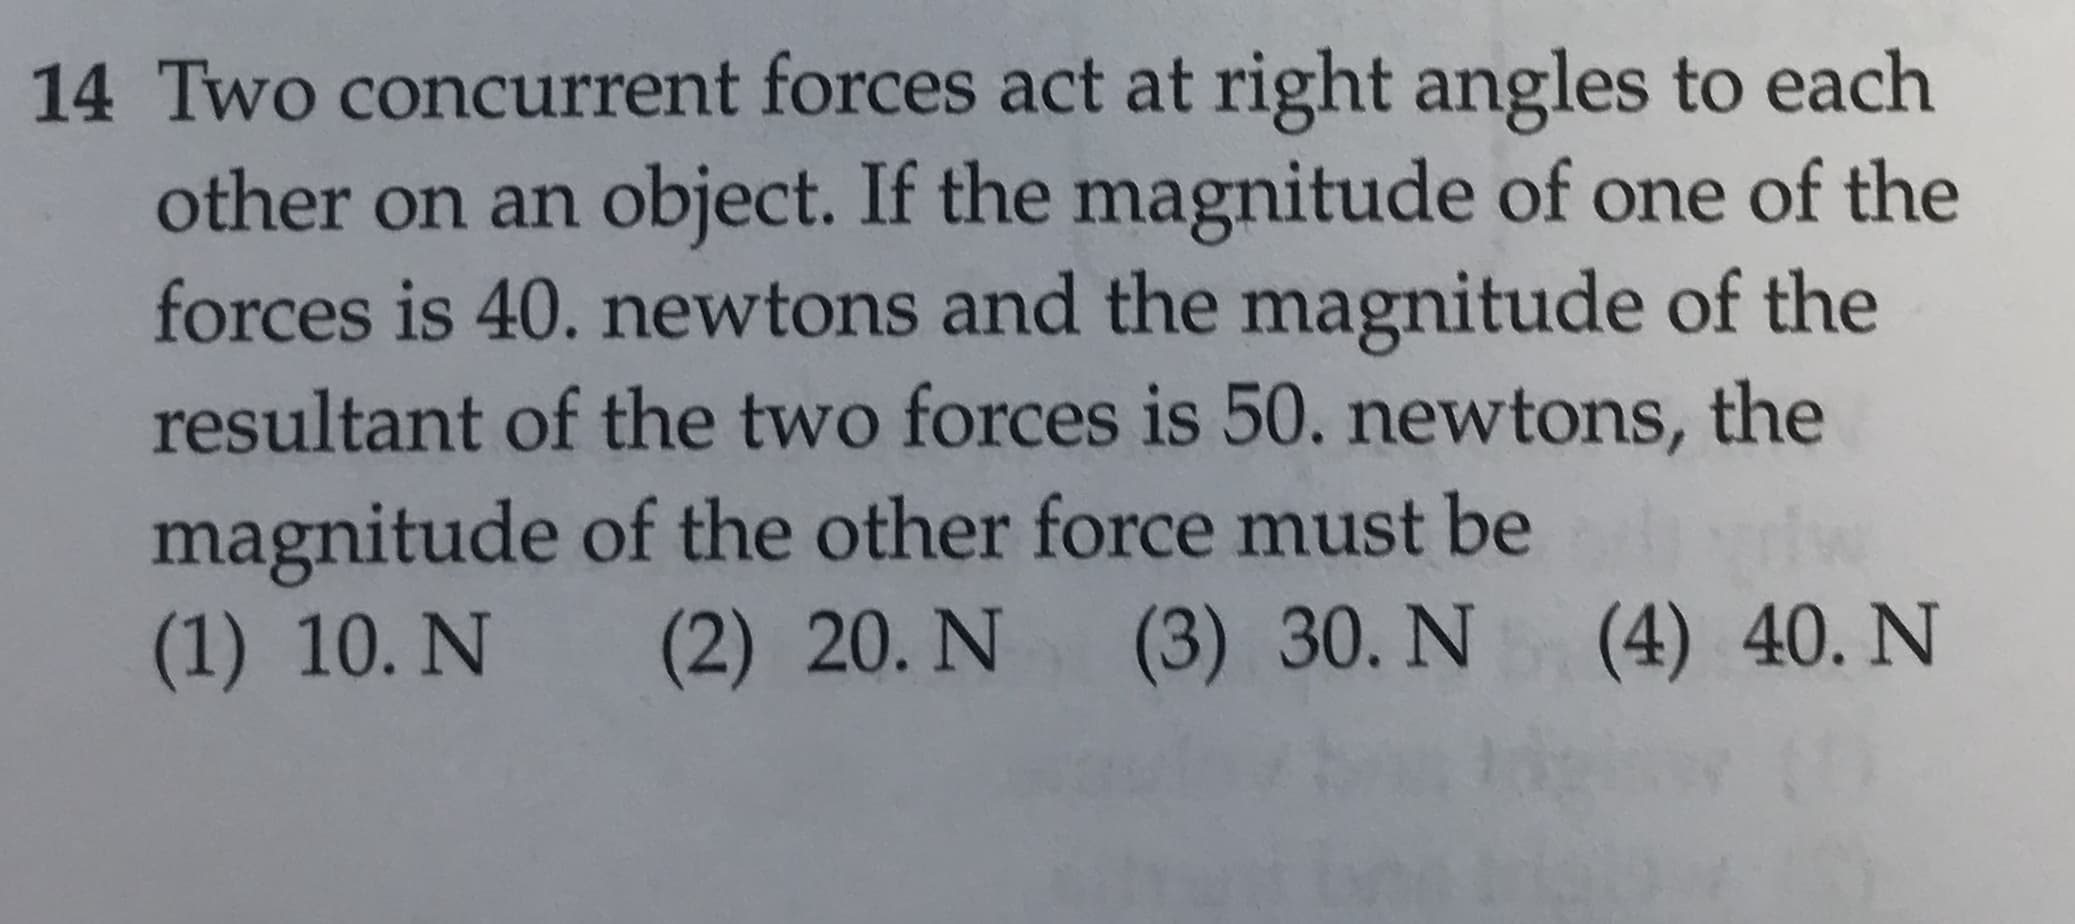 14 Two concurrent forces act at right angles to each
other on an object. If the magnitude of one of the
forces is 40. newtons and the magnitude of the
resultant of the two forces is 50. newtons, the
magnitude of the other force must be
(2) 20. N
(1) 10. N
(3) 30. N
(4) 40. N
